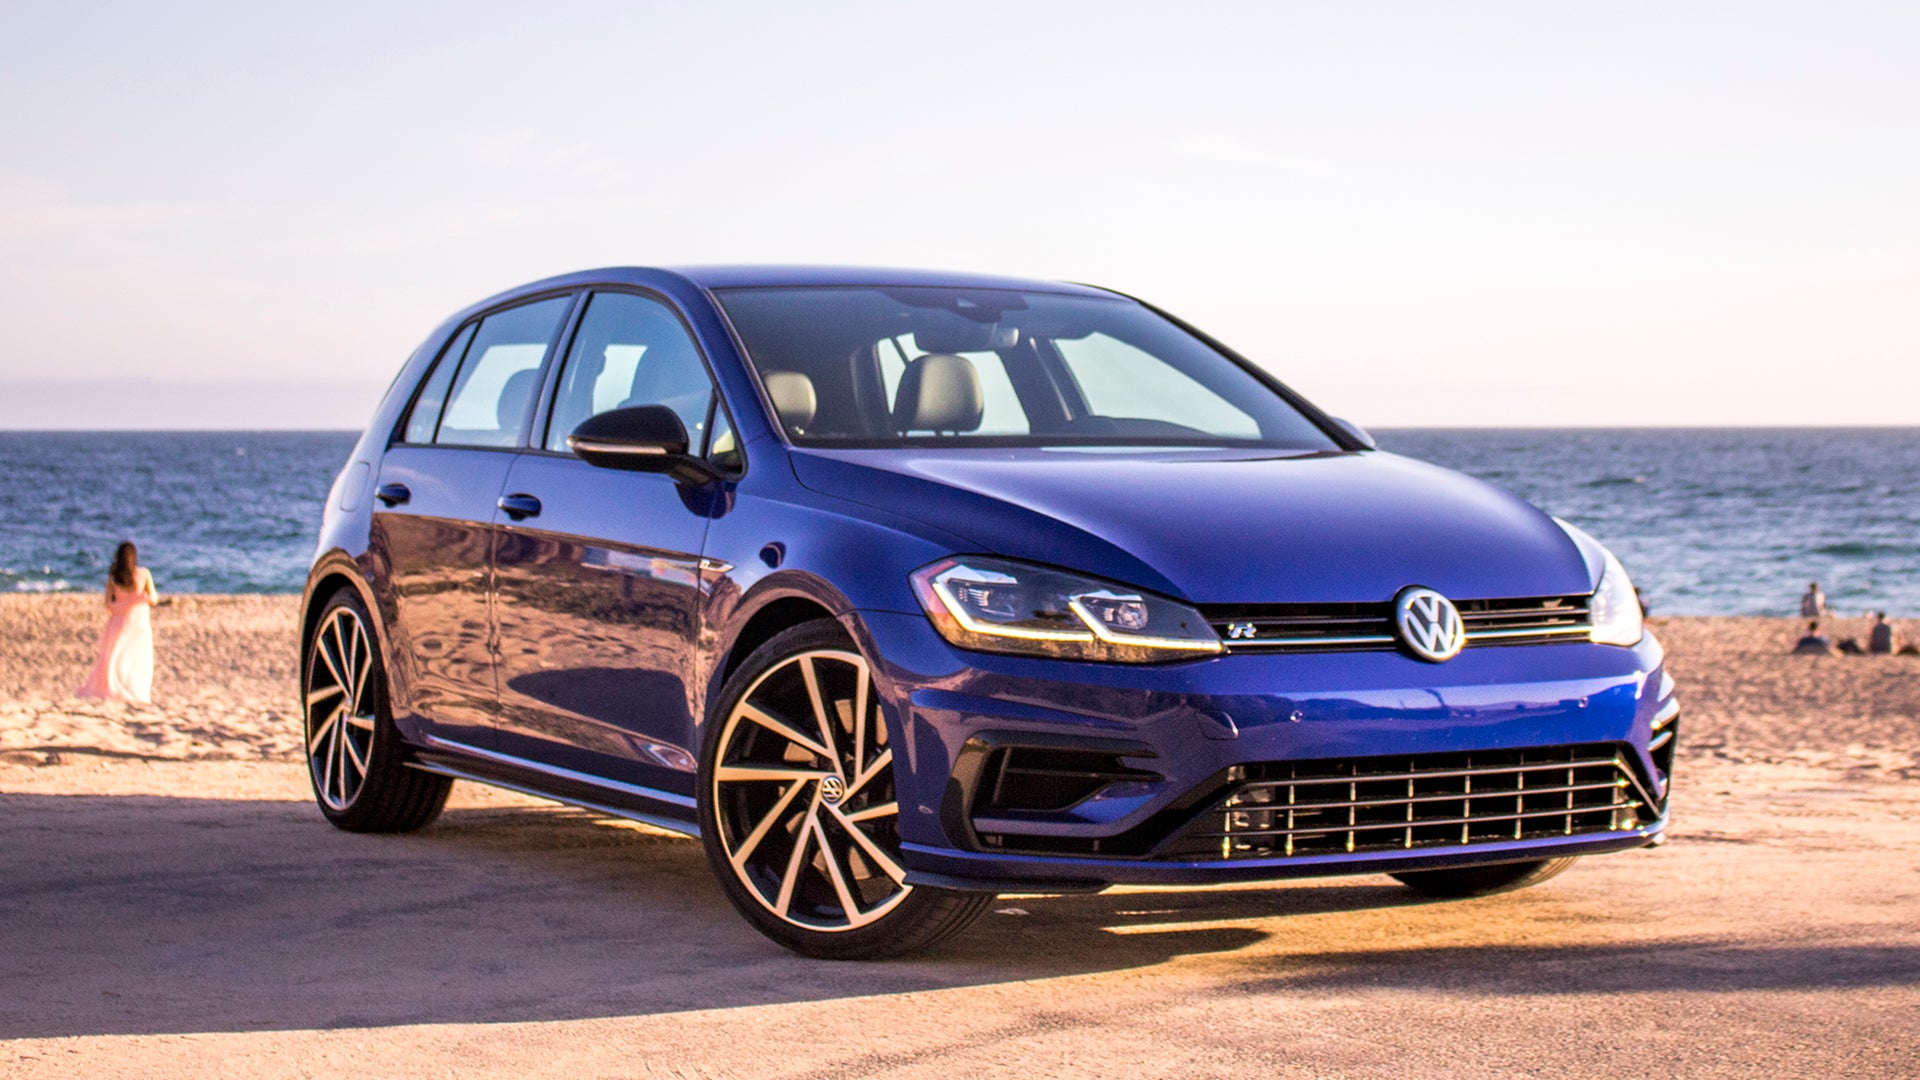 2018 Volkswagen Golf R Review: A Hot Hatch Metaphor for Adulthood's Sense  and Sensibility